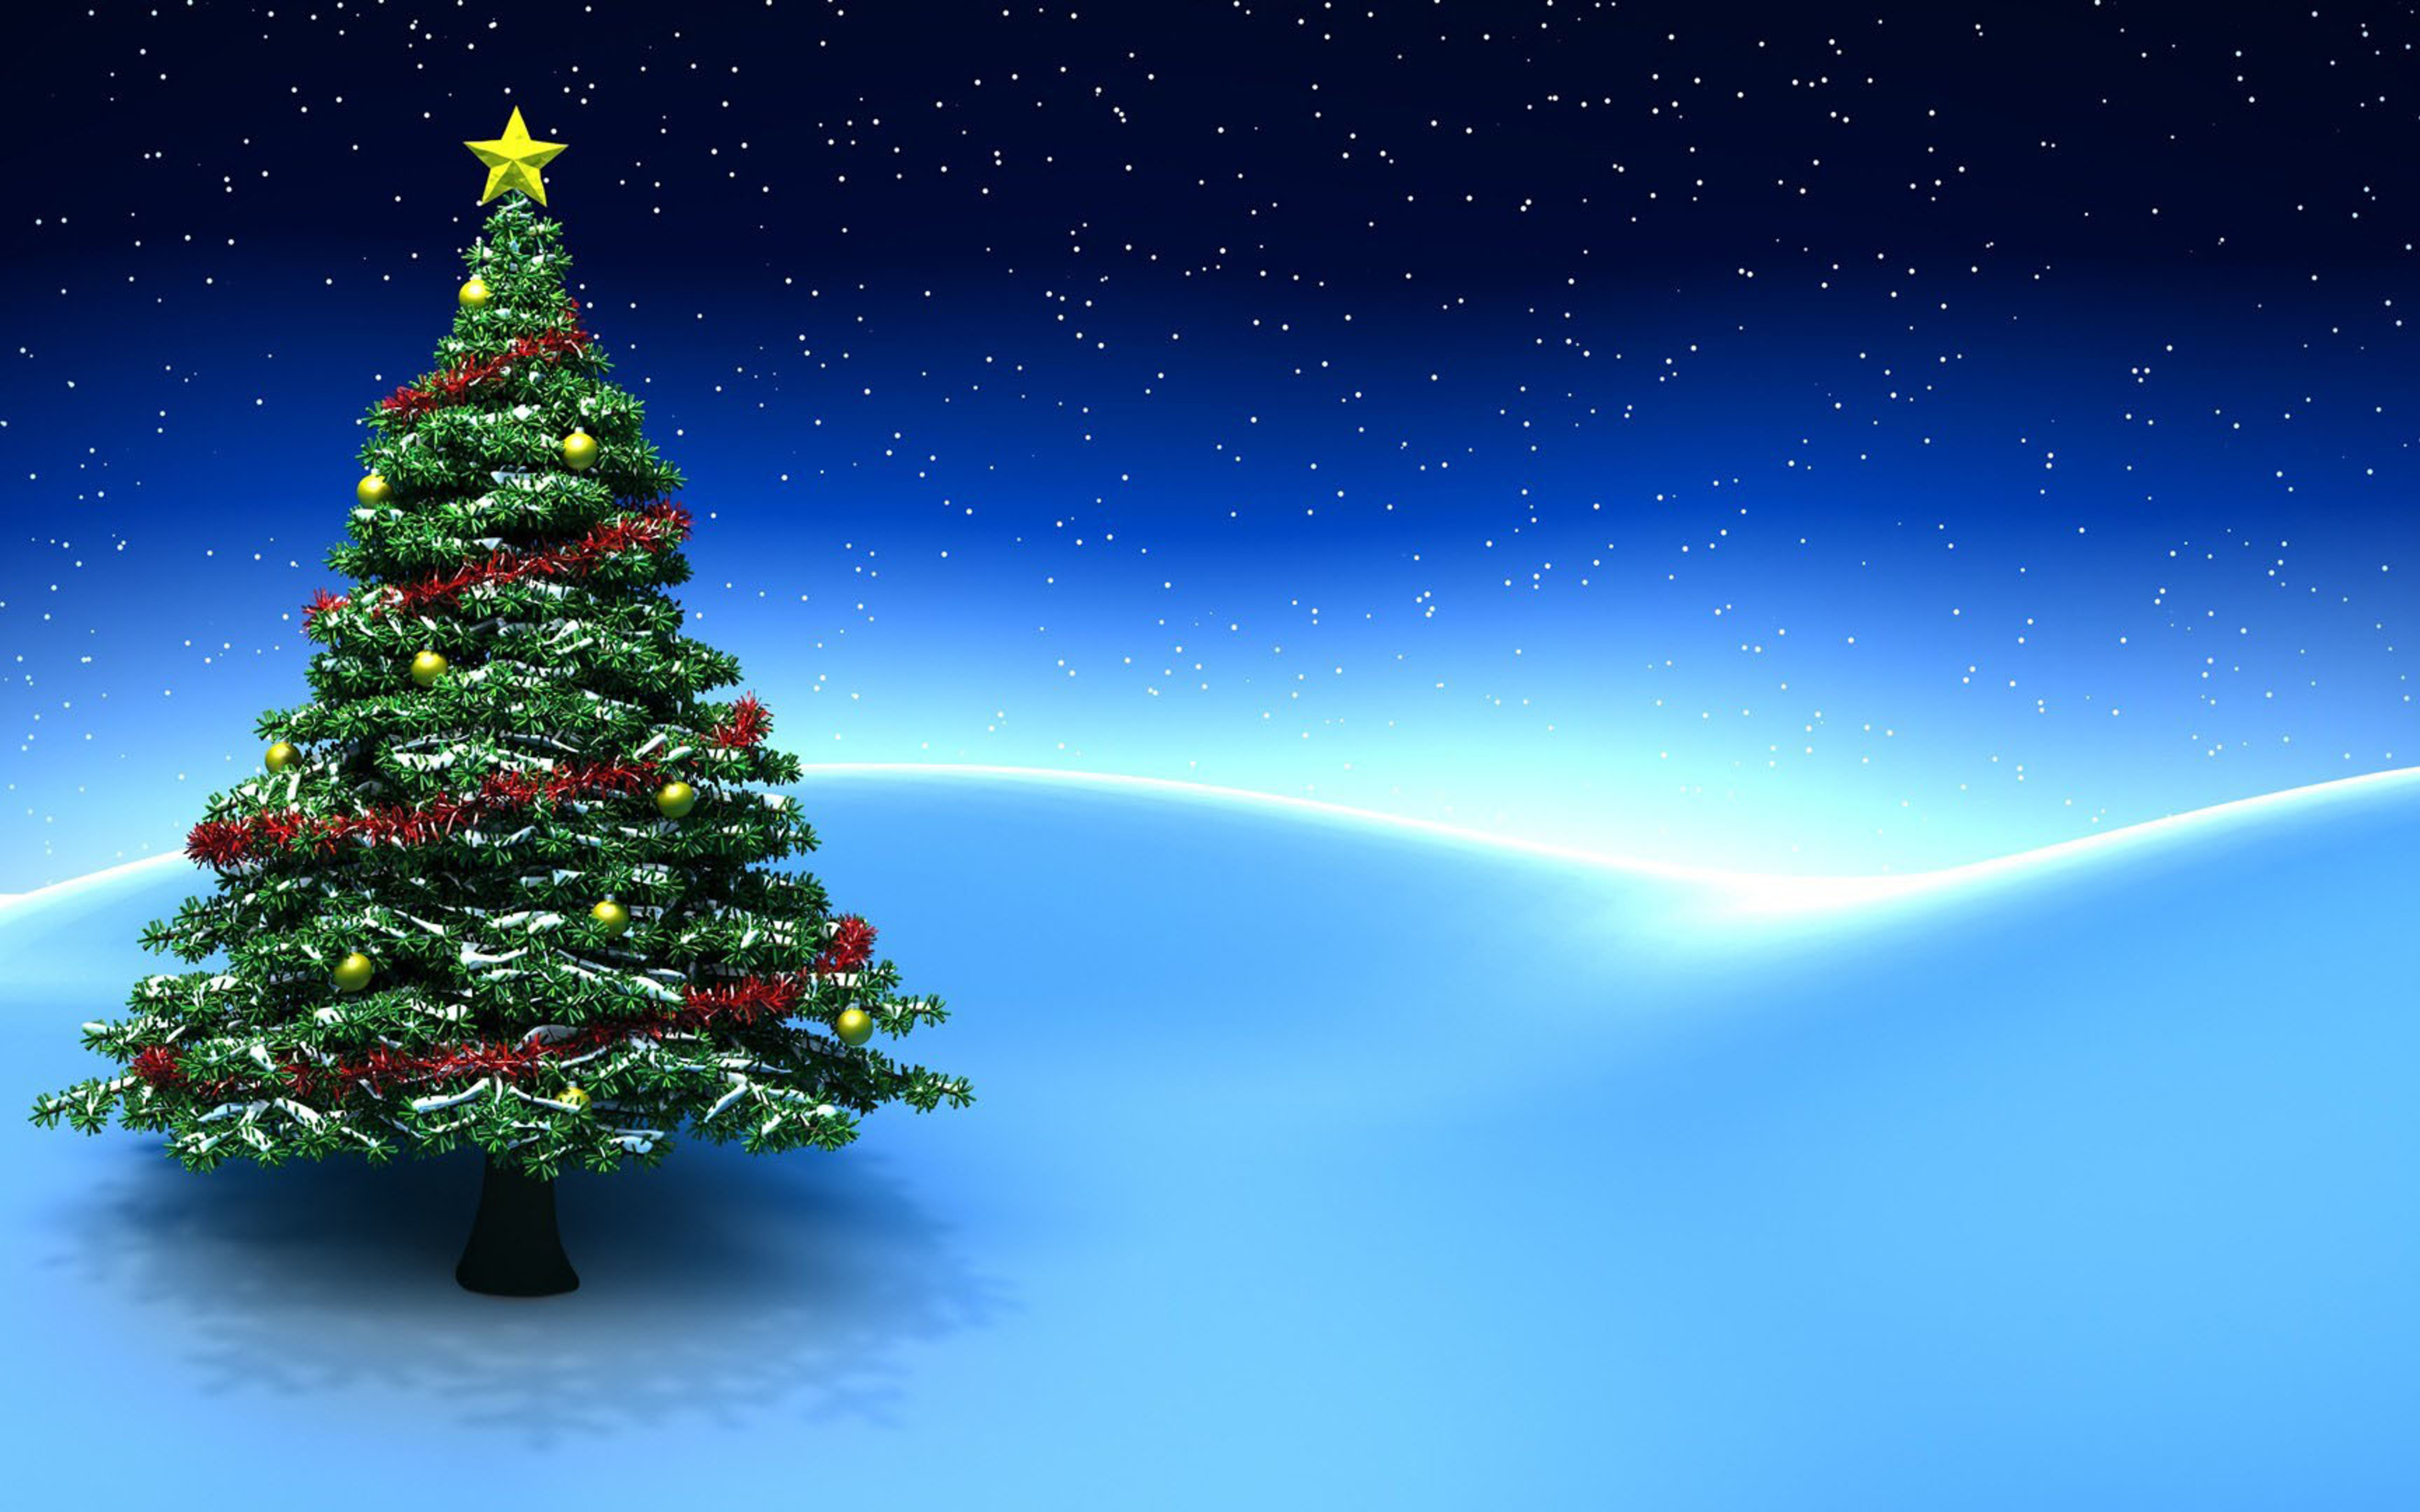 Free Download Christmas Tree On A Magic Blue Night Hd Wallpaper 51x30 For Your Desktop Mobile Tablet Explore 50 Weihnachtsbaum Wallpaper Weihnachtsbaum Wallpaper